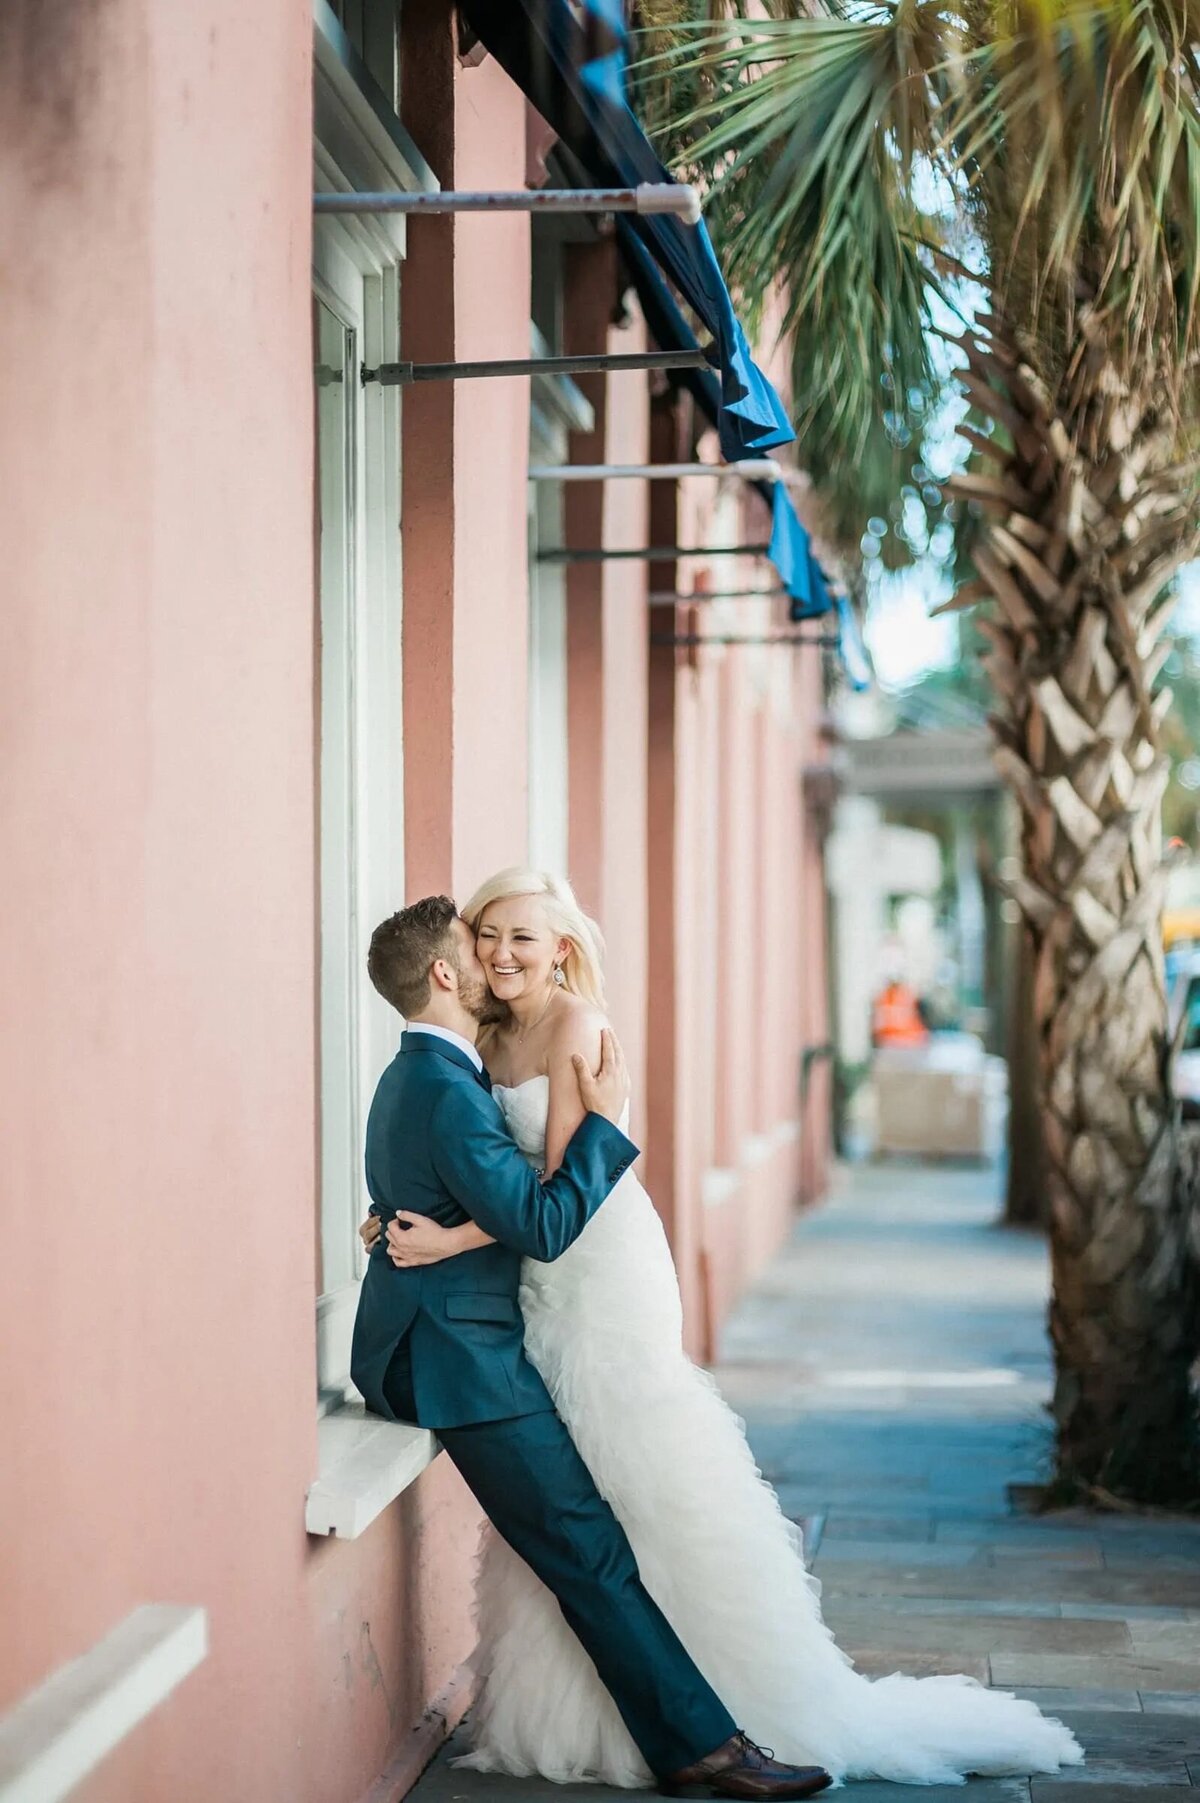 A groom leaning against a building hugging a bride.